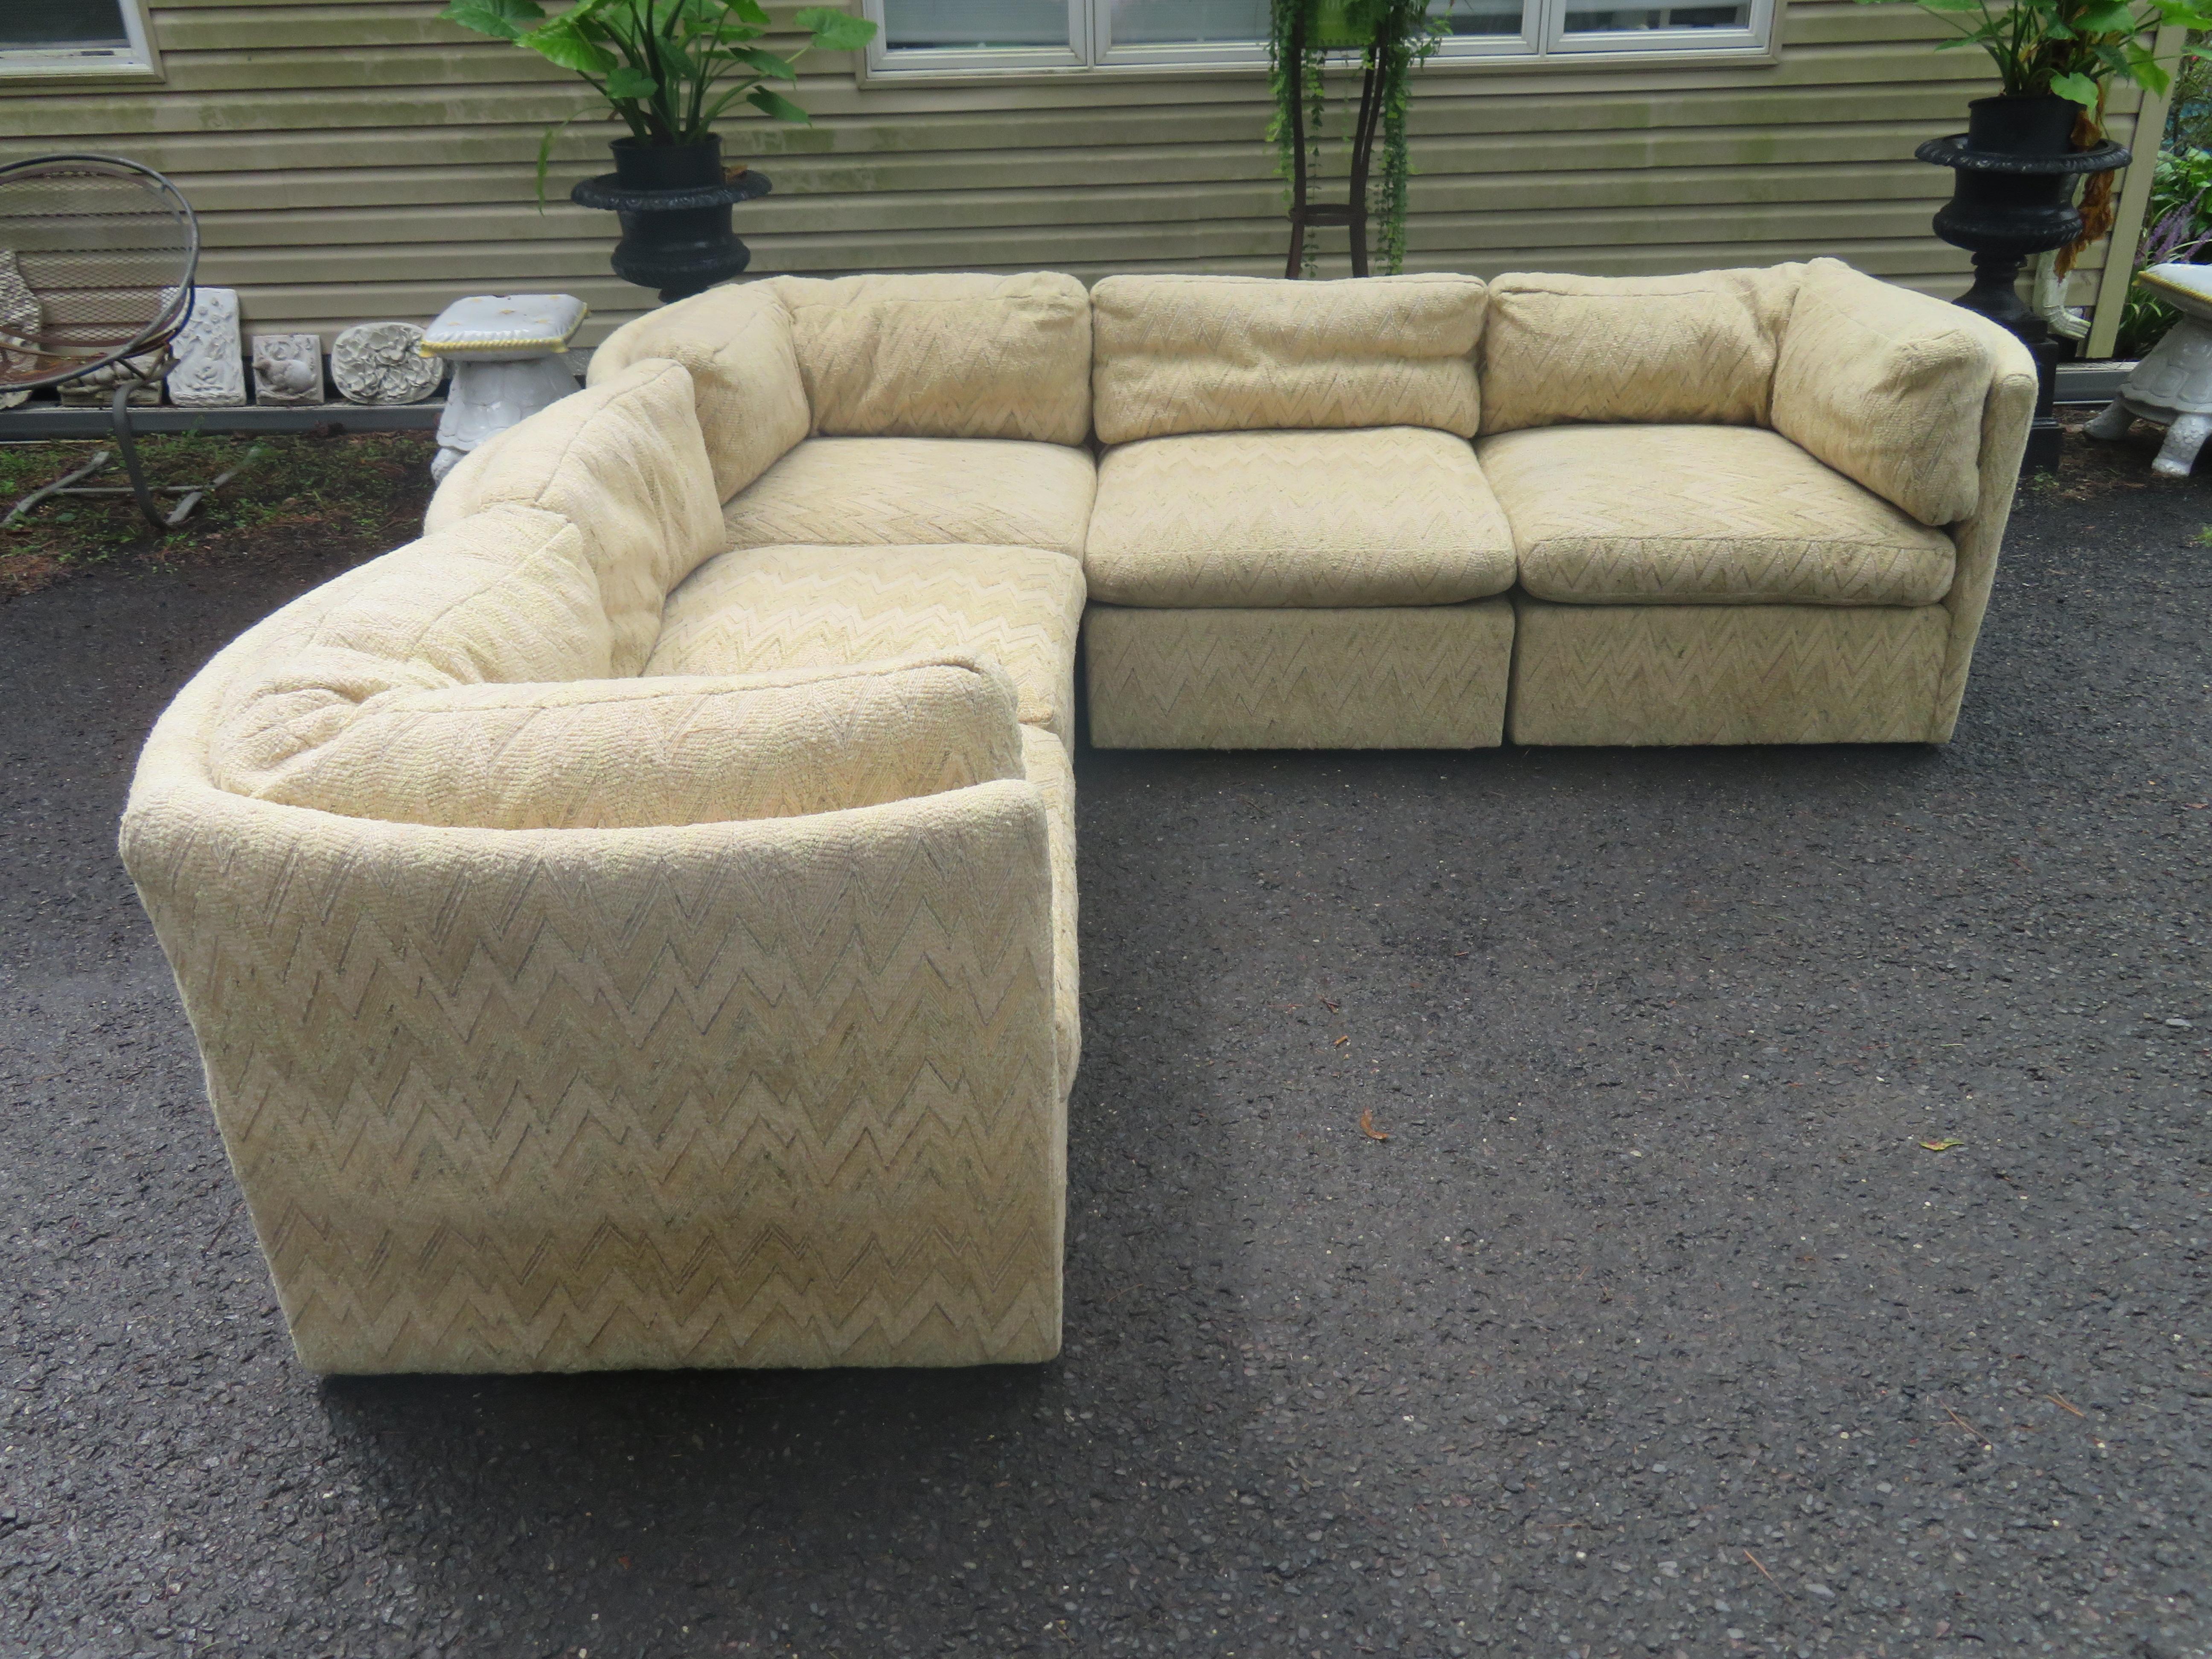 Wonderful 5-piece signed Milo Baughman for Thayer Coggin curved back cube sectional sofa. This set is in nice vintage condition but the fabric is dated and shows light wear so we recommend re-upholstery. We love these cube sectional sofas by Mr.